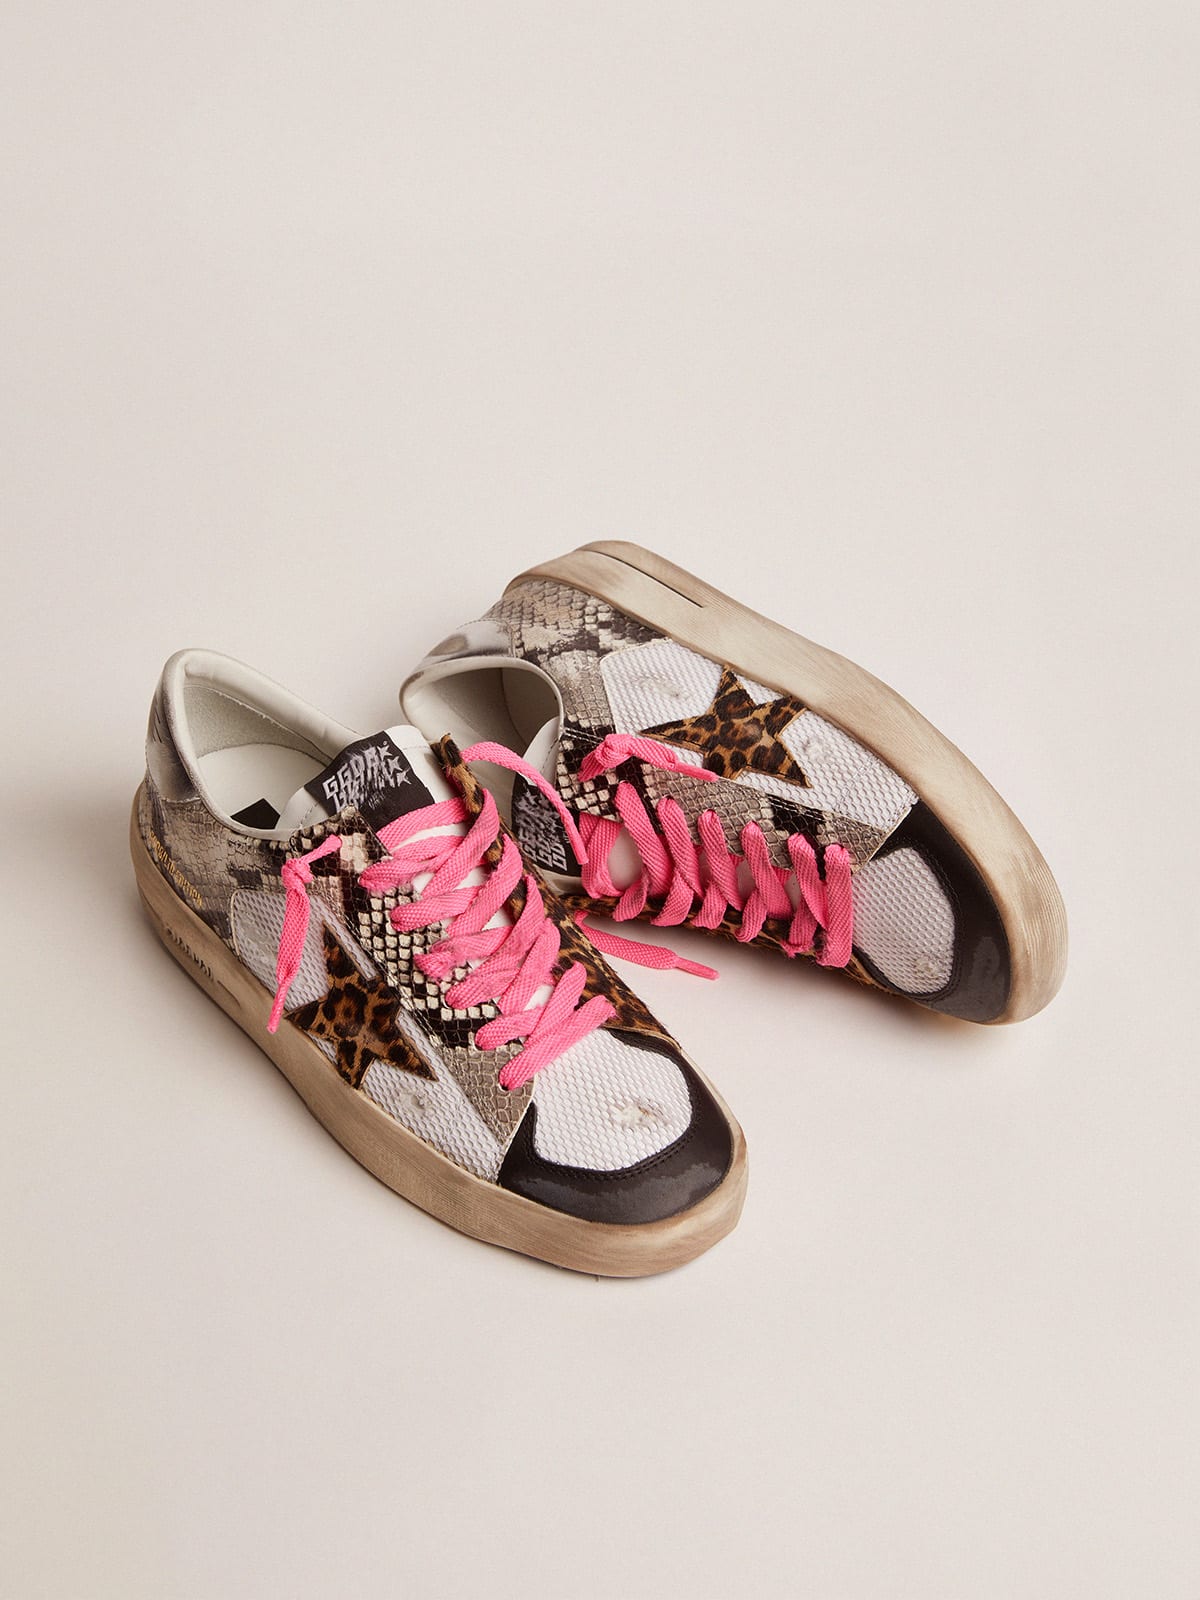 Golden Goose - Women’s Stardan LAB sneakers with leather upper and leopard-print pony skin star in 